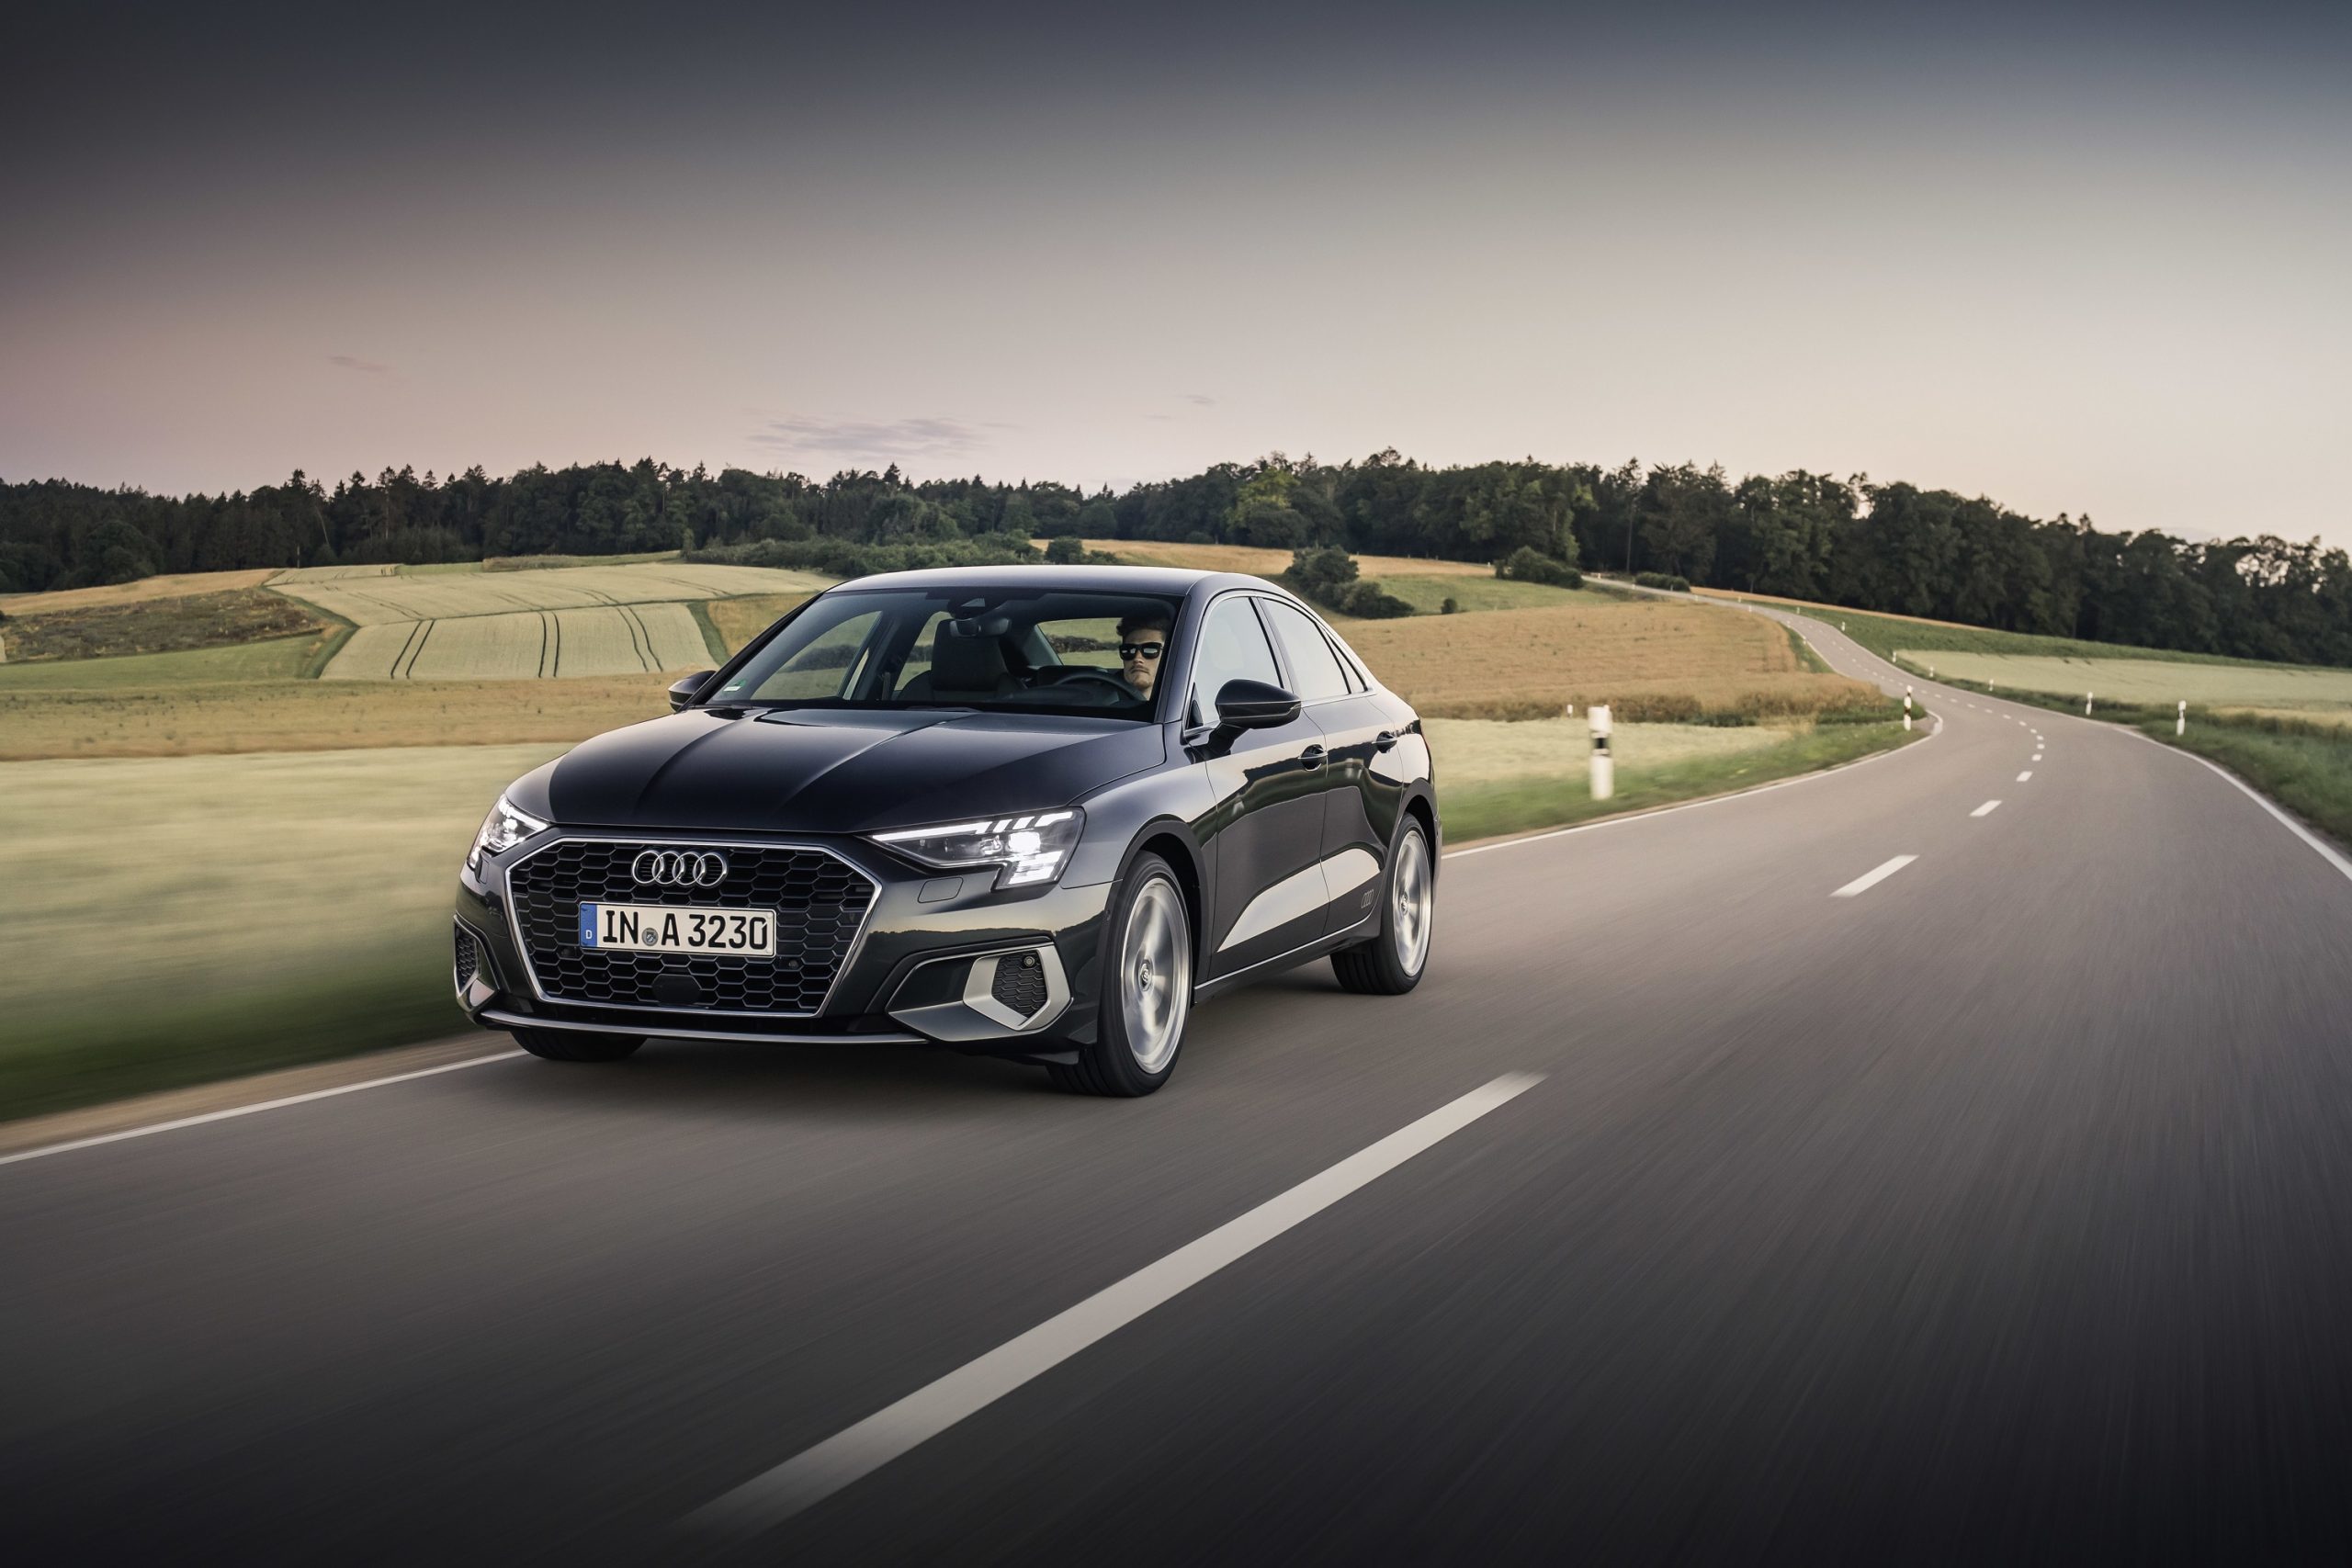 The 2022 Audi A3 in grey on a country road, shot from the 3/4 angle